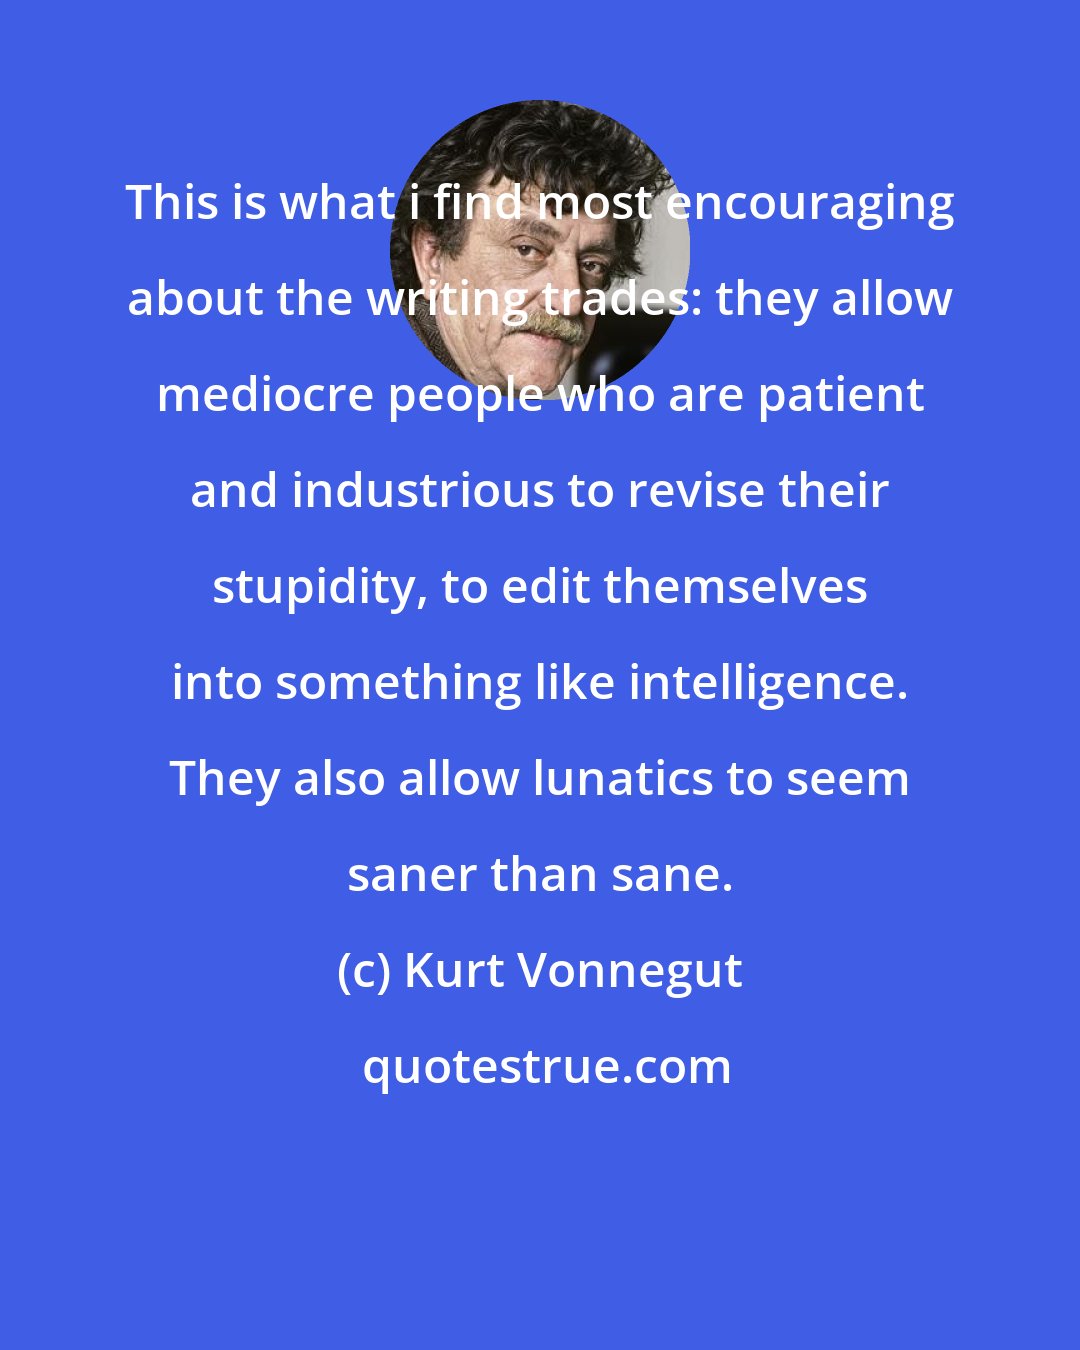 Kurt Vonnegut: This is what i find most encouraging about the writing trades: they allow mediocre people who are patient and industrious to revise their stupidity, to edit themselves into something like intelligence. They also allow lunatics to seem saner than sane.